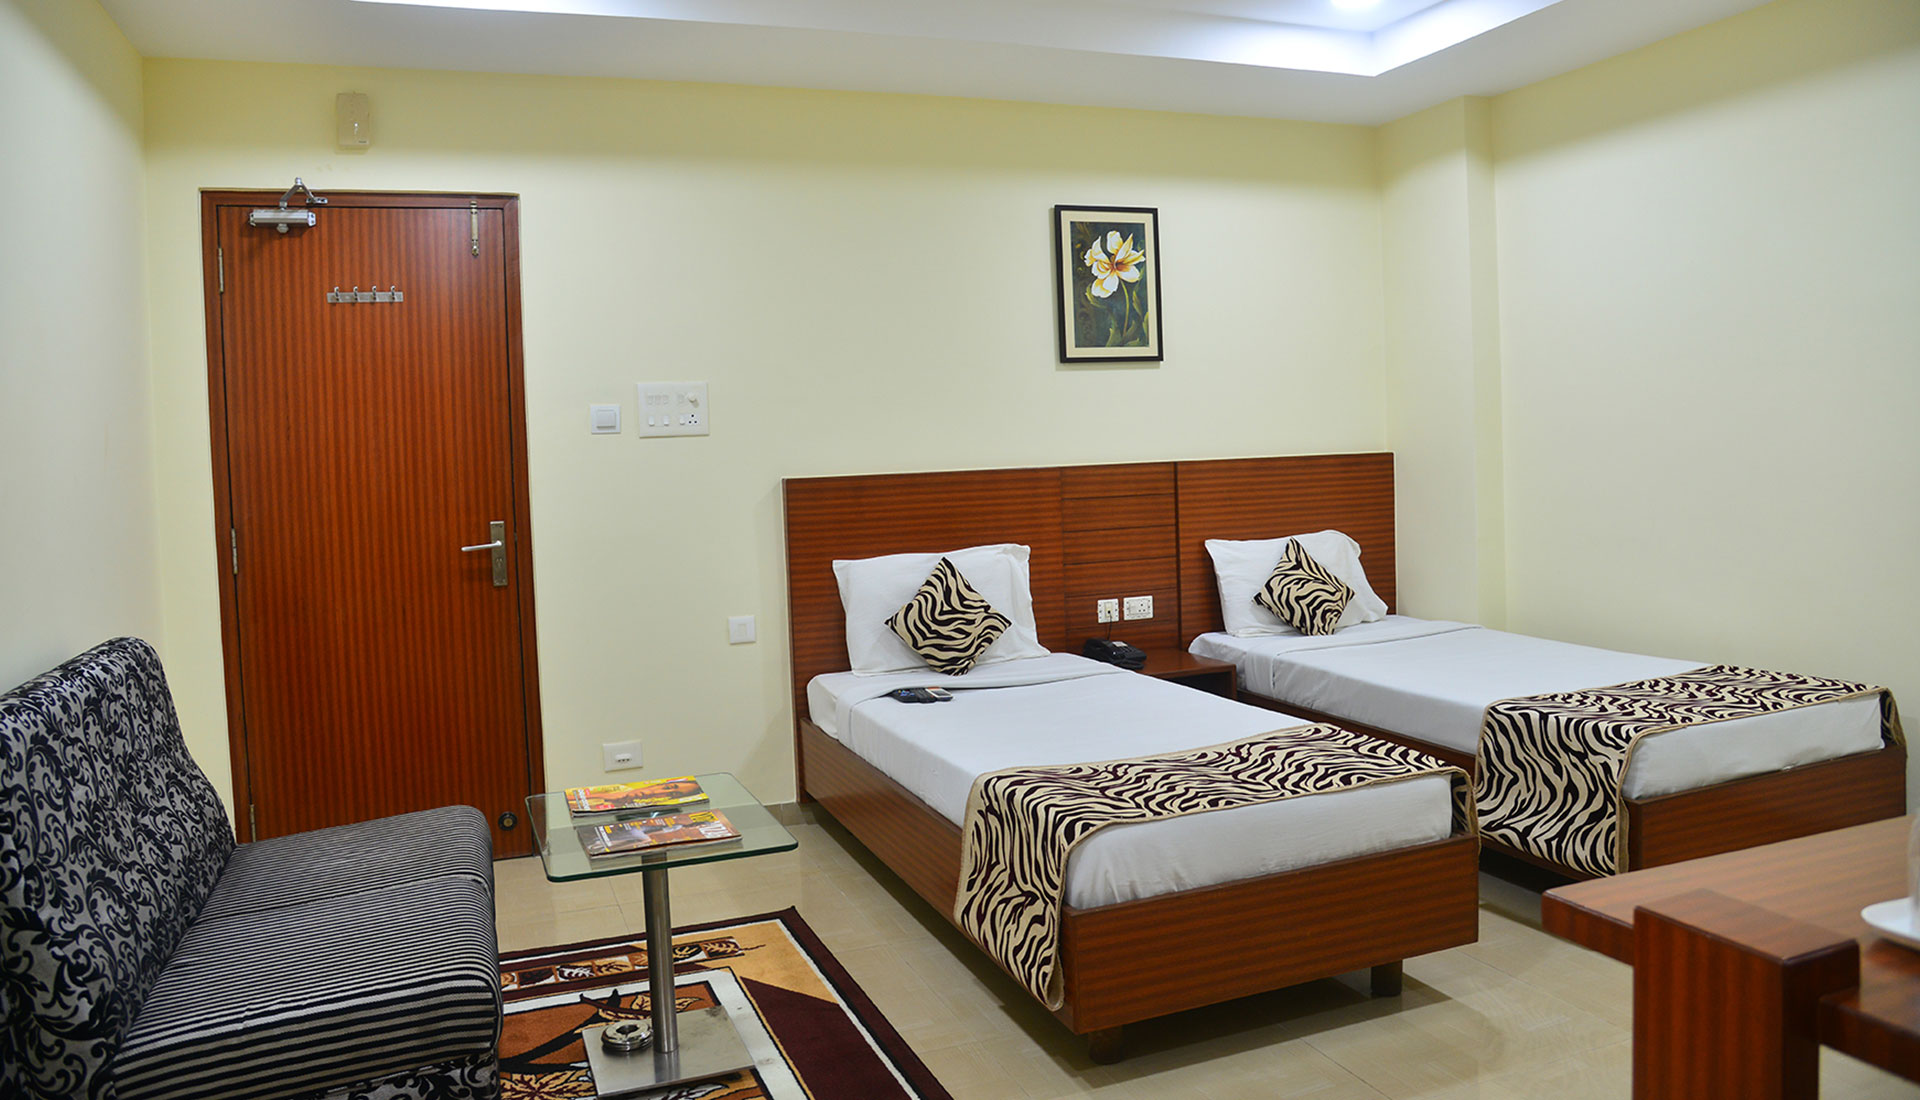 Executive Standard room (Twin beds)